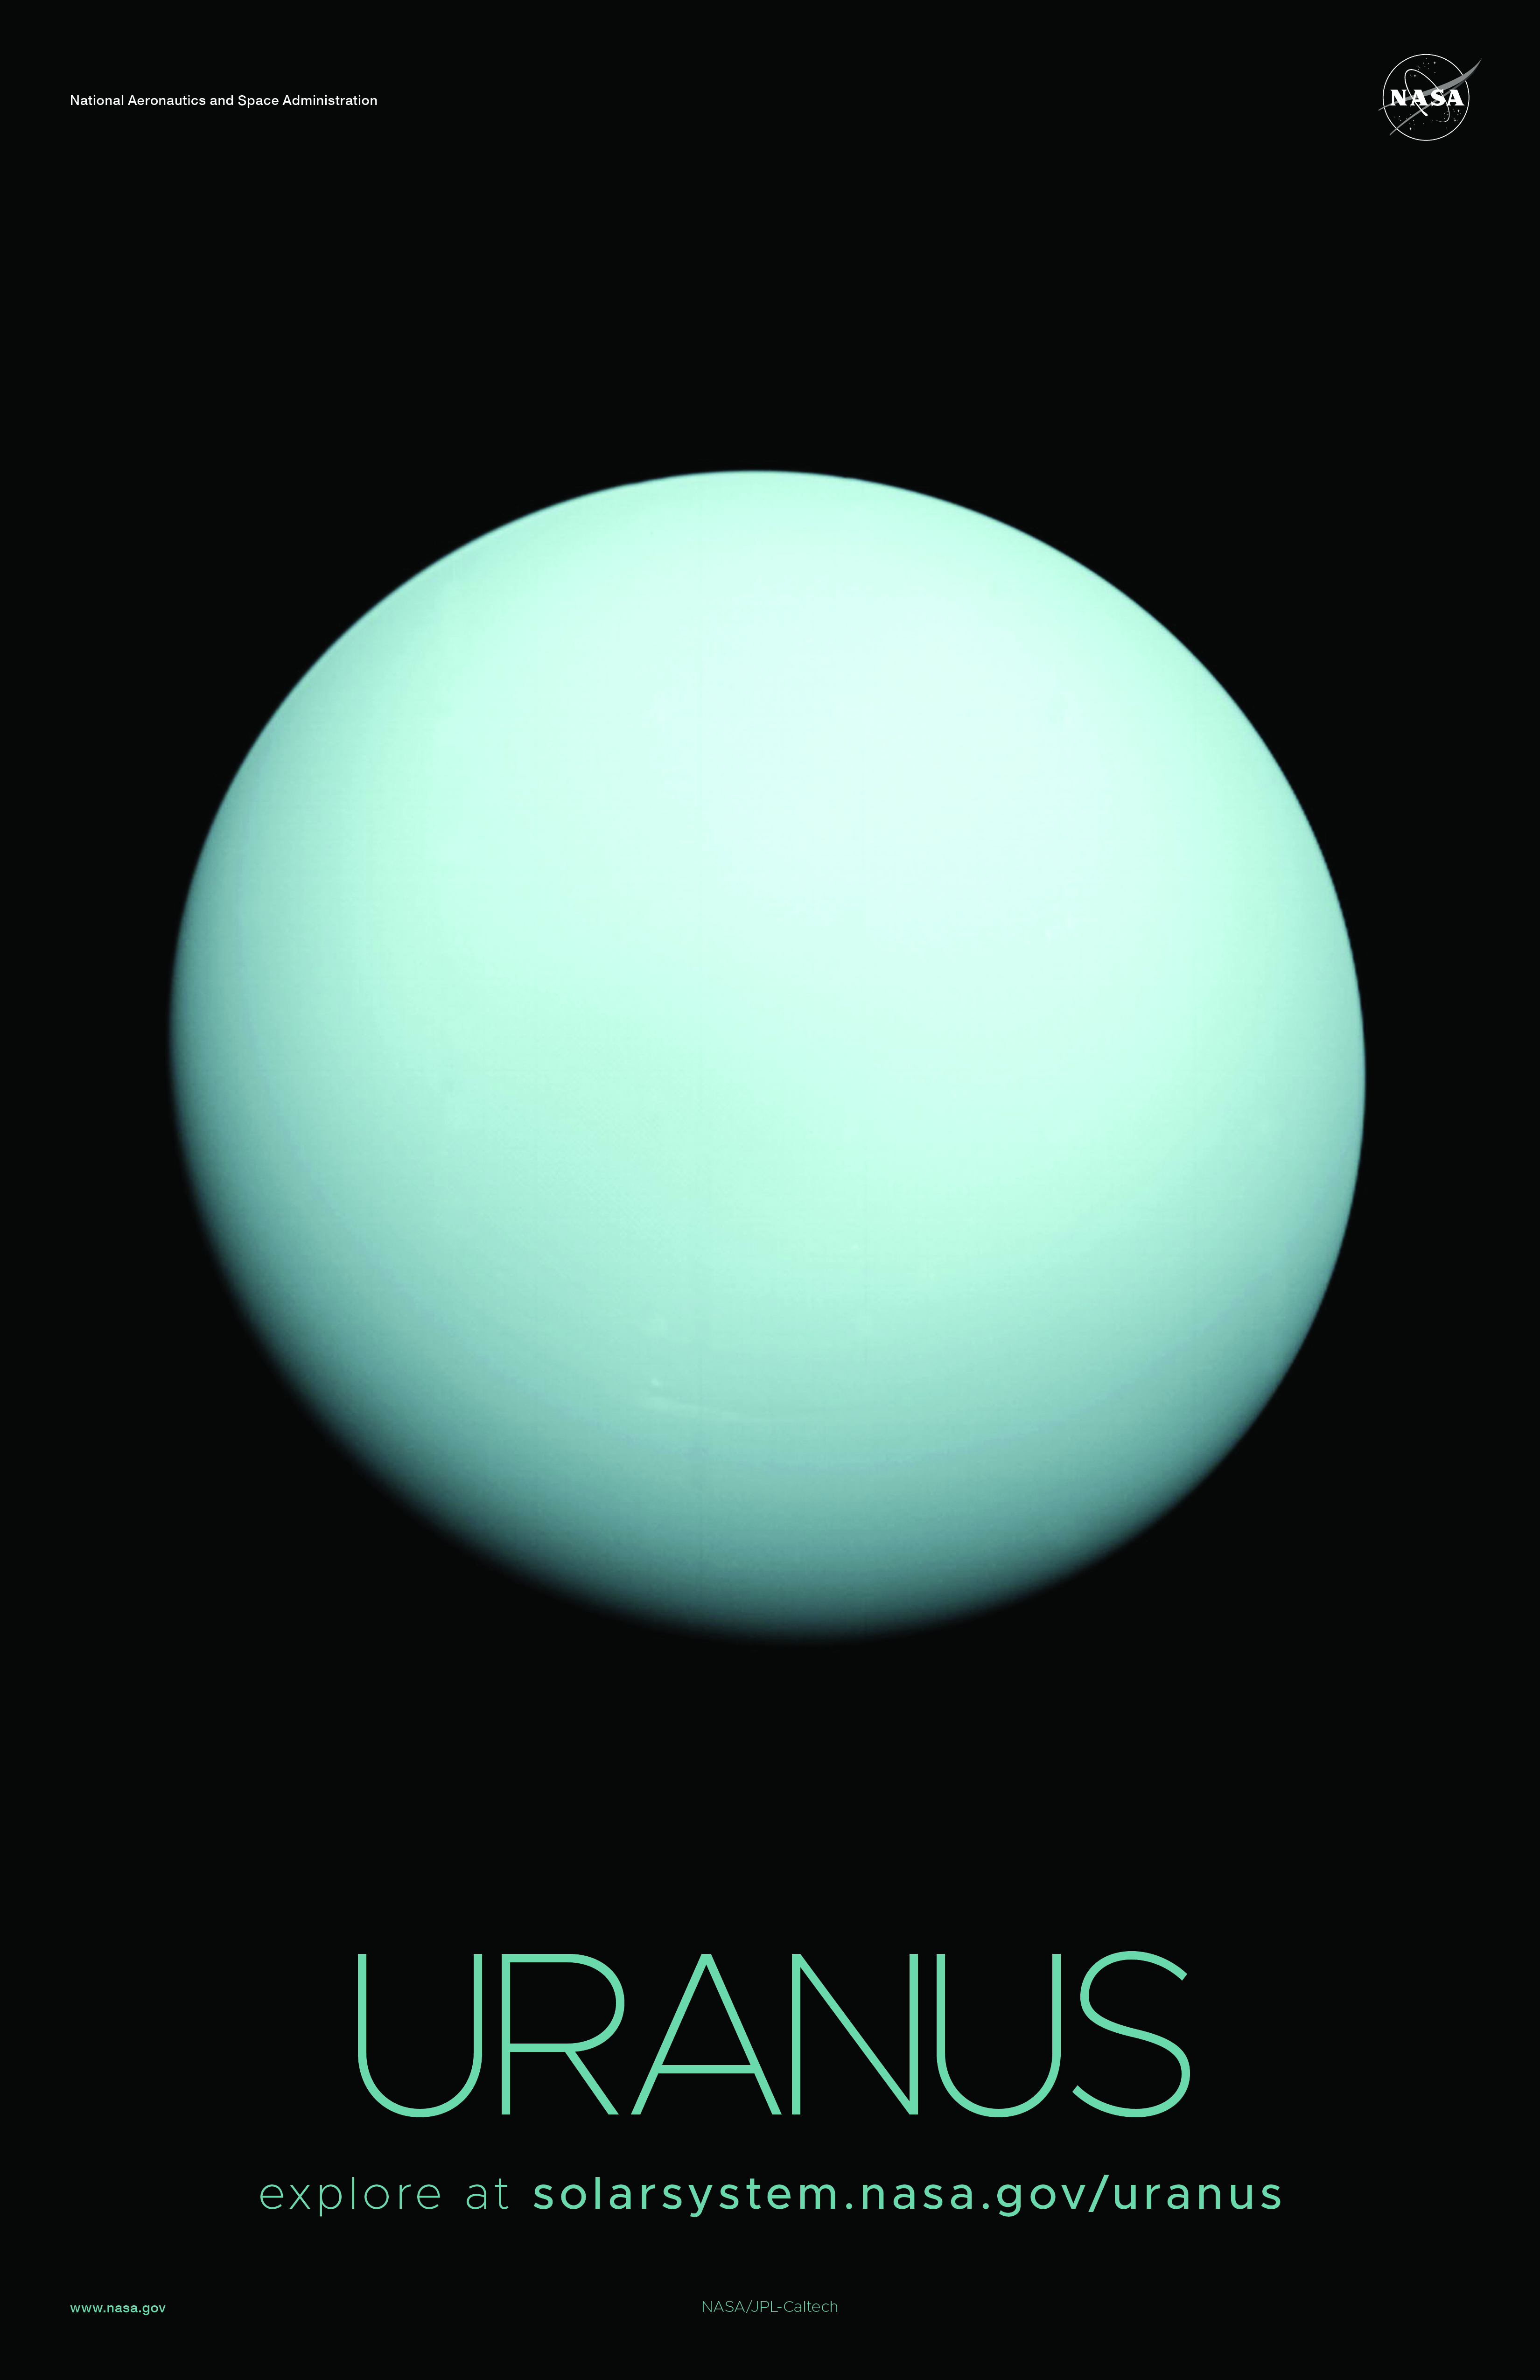 A global view of the planet Uranus is shown with a black backdrop.